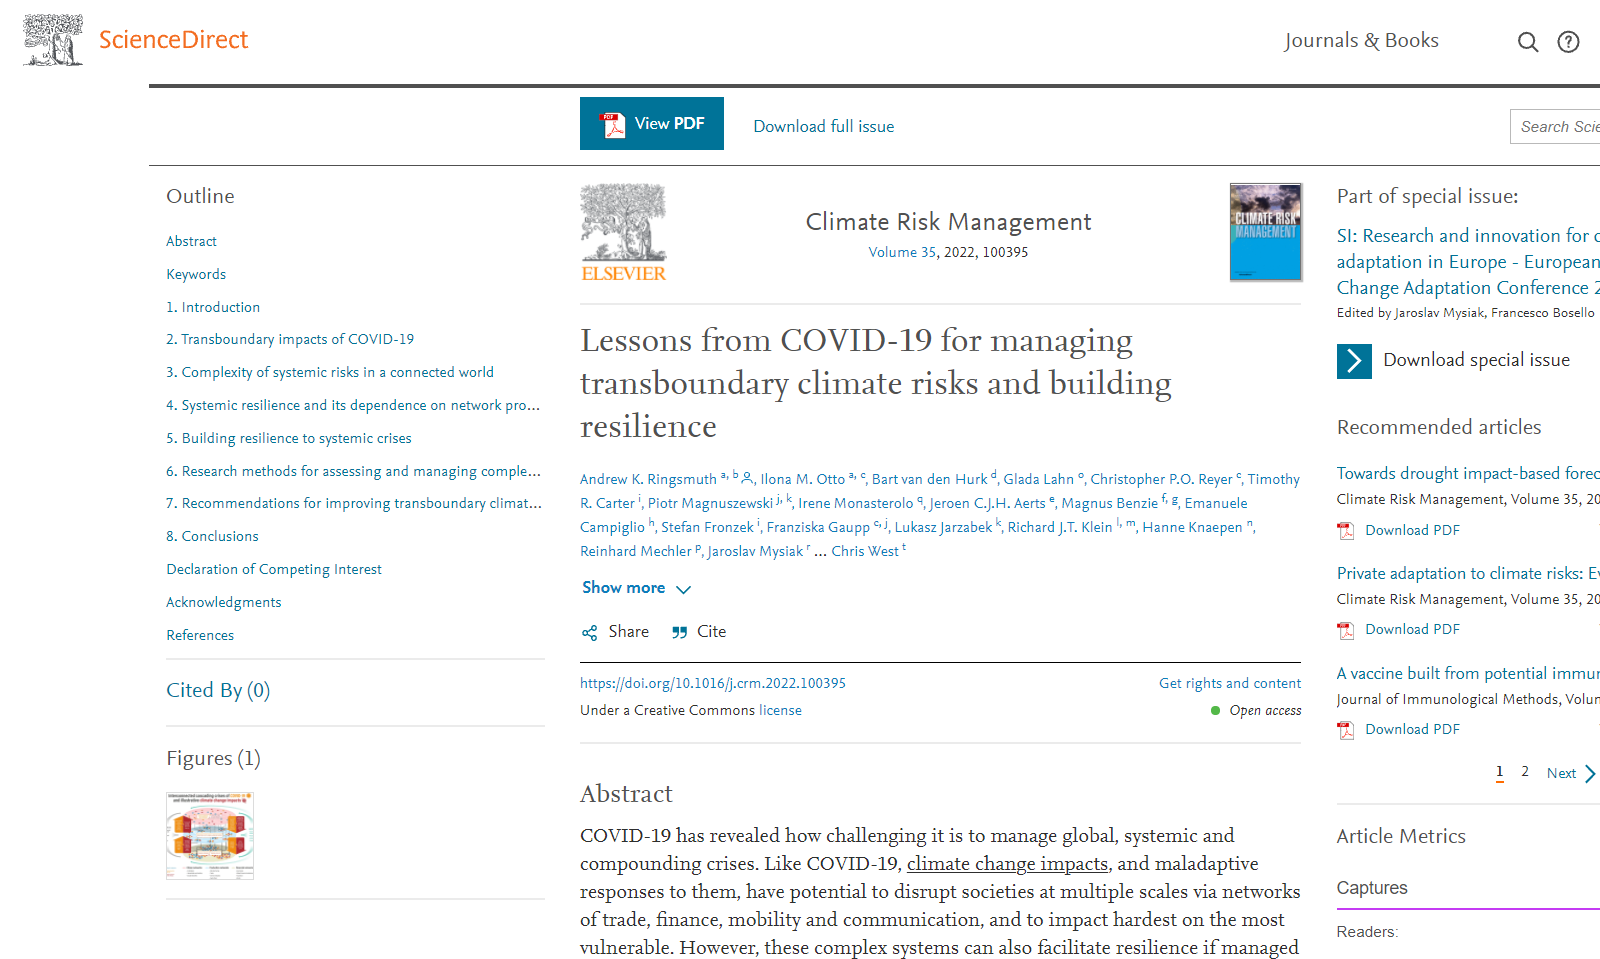 ‘Lessons from COVID-19 for managing transboundary climate risks and building resilience’